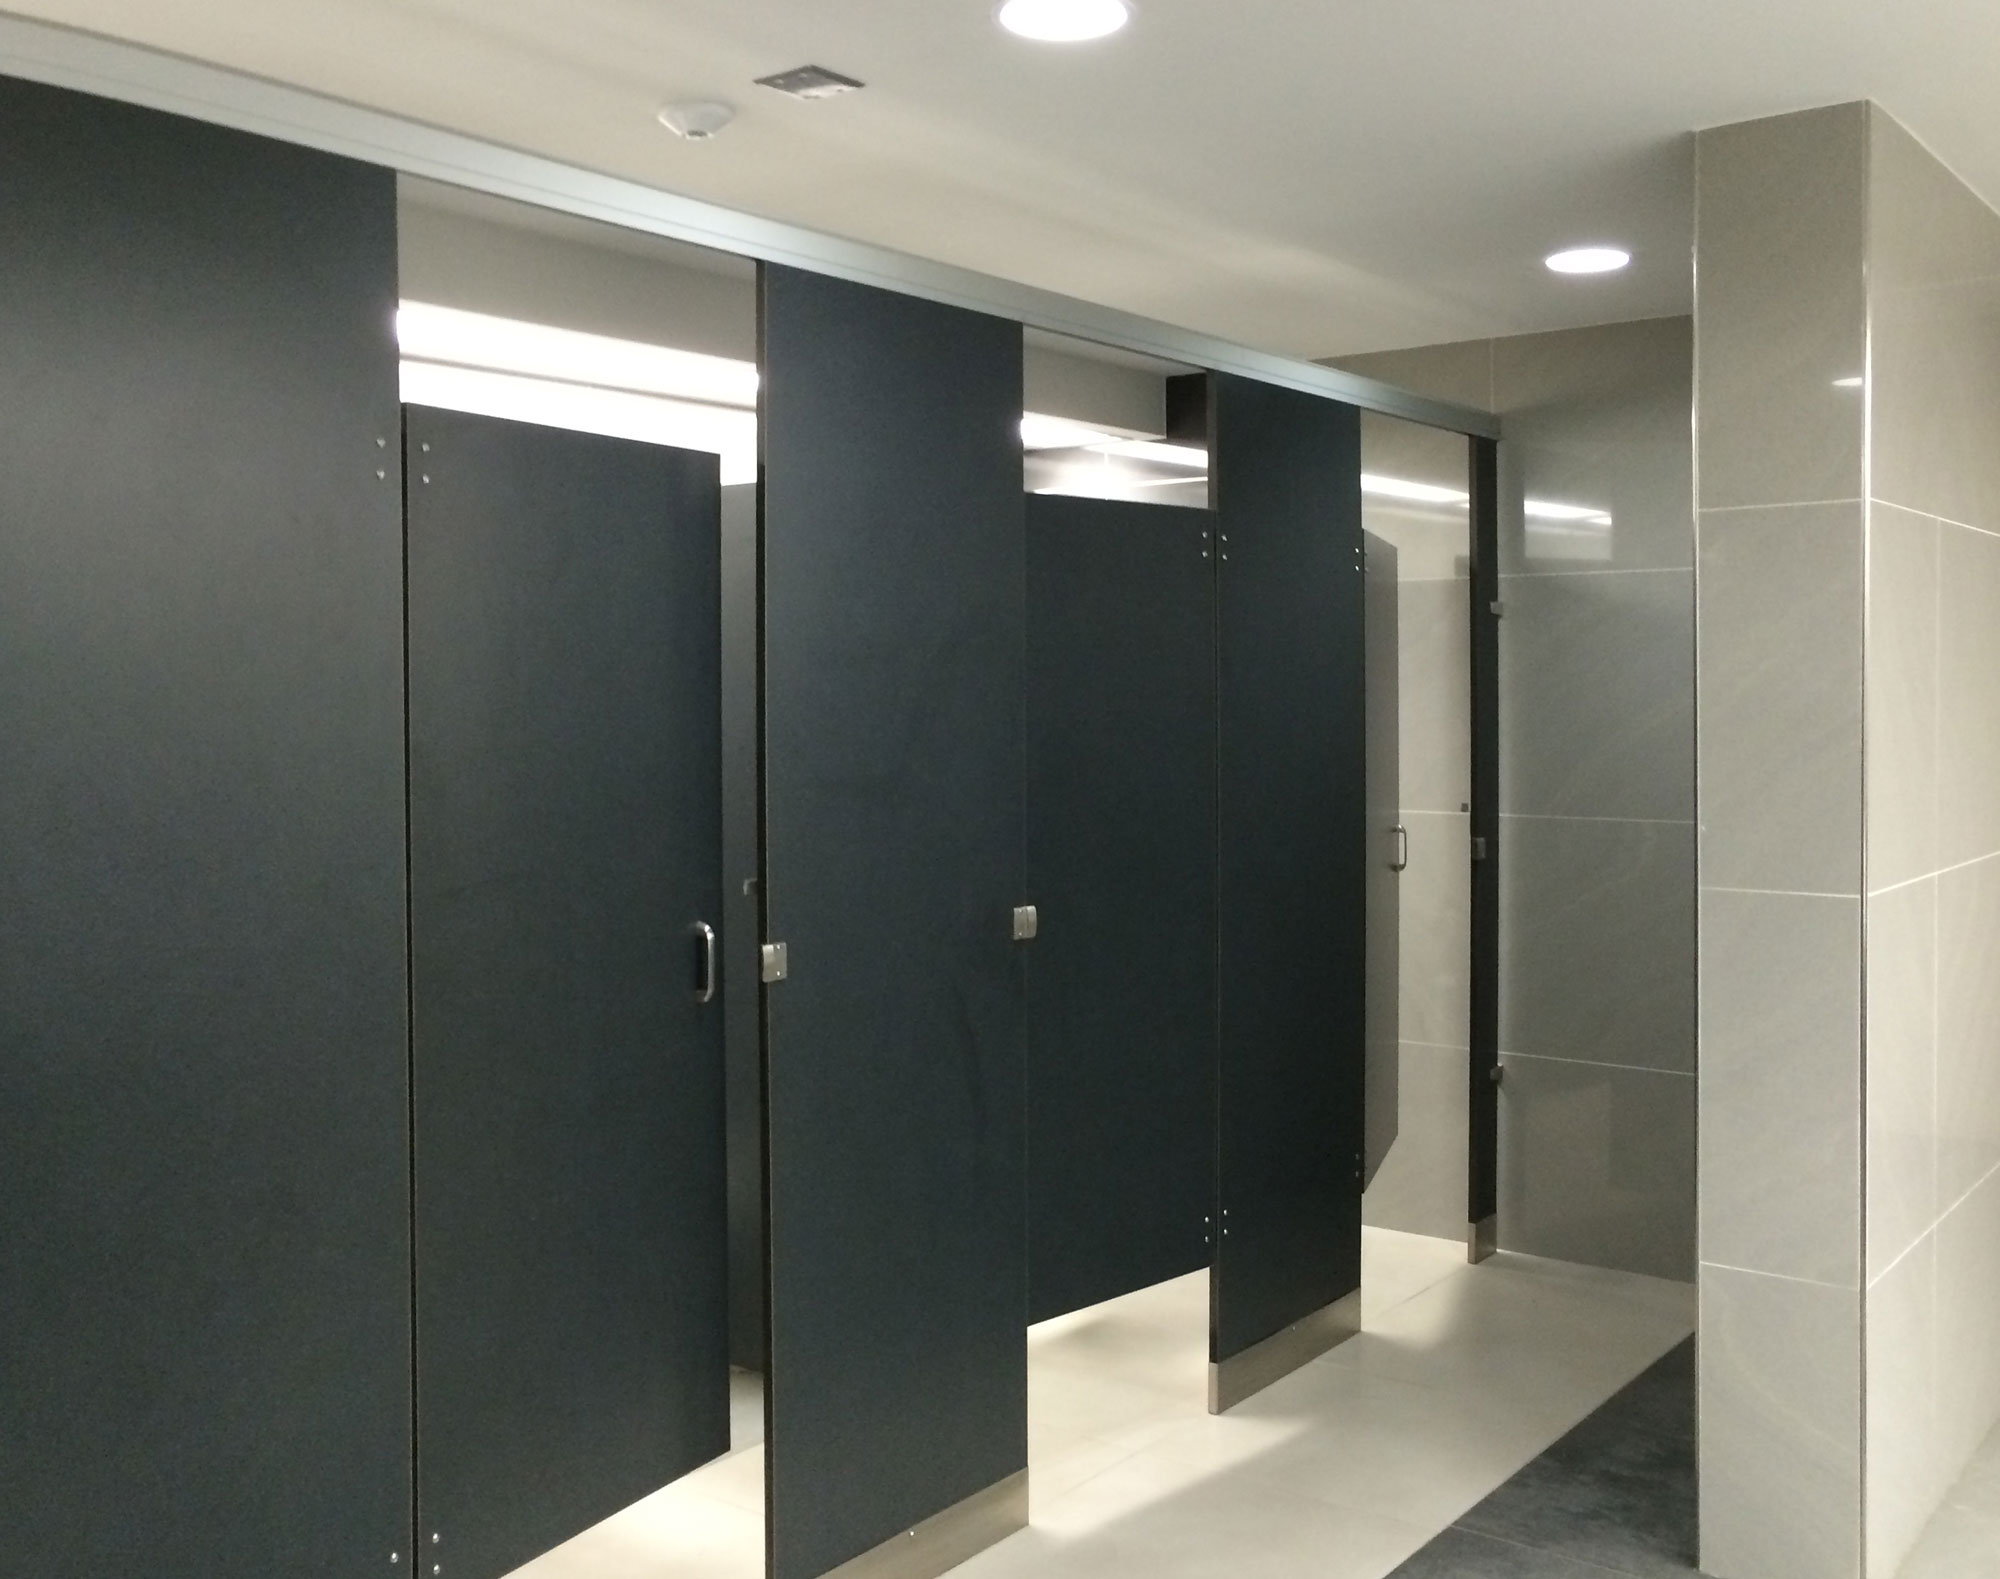 Airport bathroom with plastic laminate partitions